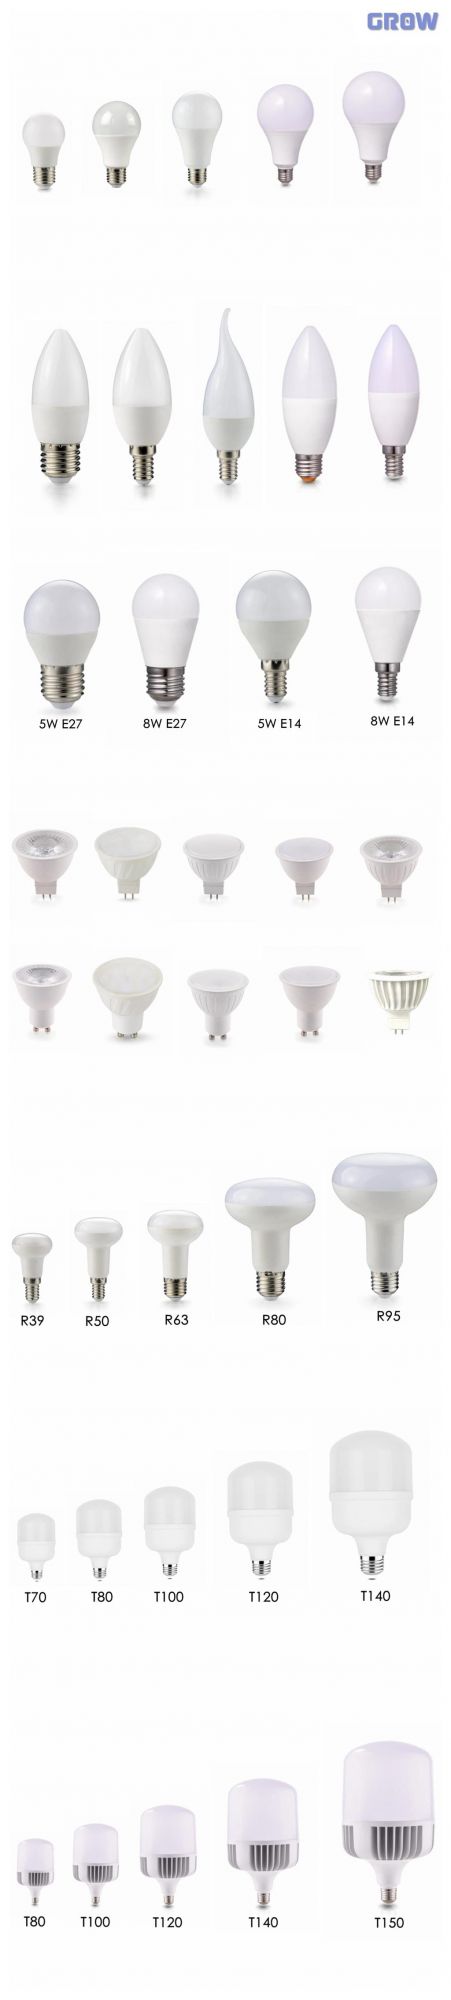 New Looking LED Bulb Light GU10/MR16 LED Lamp COB 5W/7W Indoor Lighting LED Bulb Lamp LED Recessed Spotlight with 2 Years Warranty